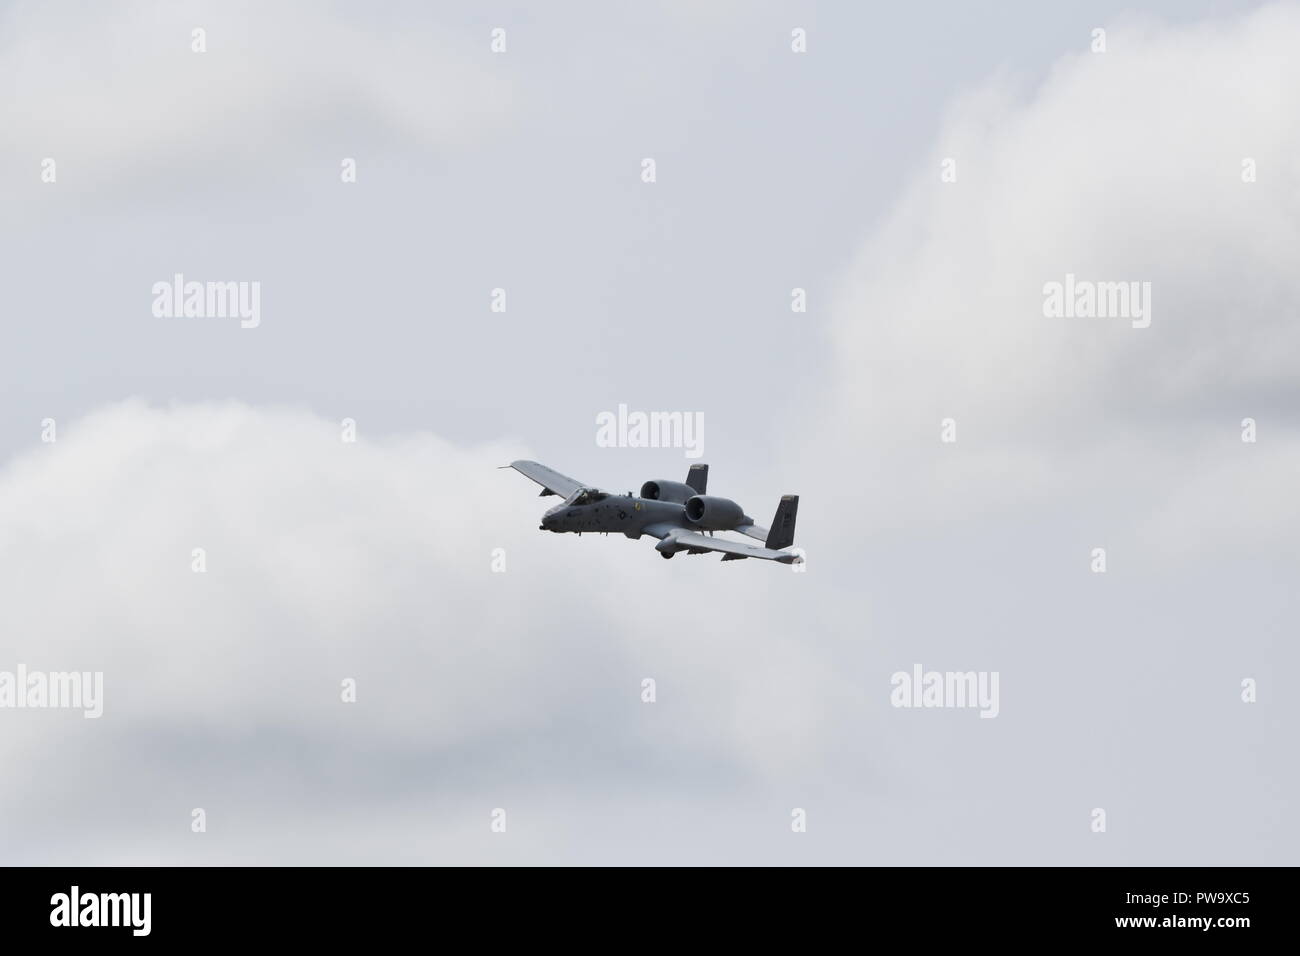 The Fairchild Republic A-10 Thunderbolt II 'Warthog' is a ground attack aircraft of the US Air Force and Air National Guard. Stock Photo